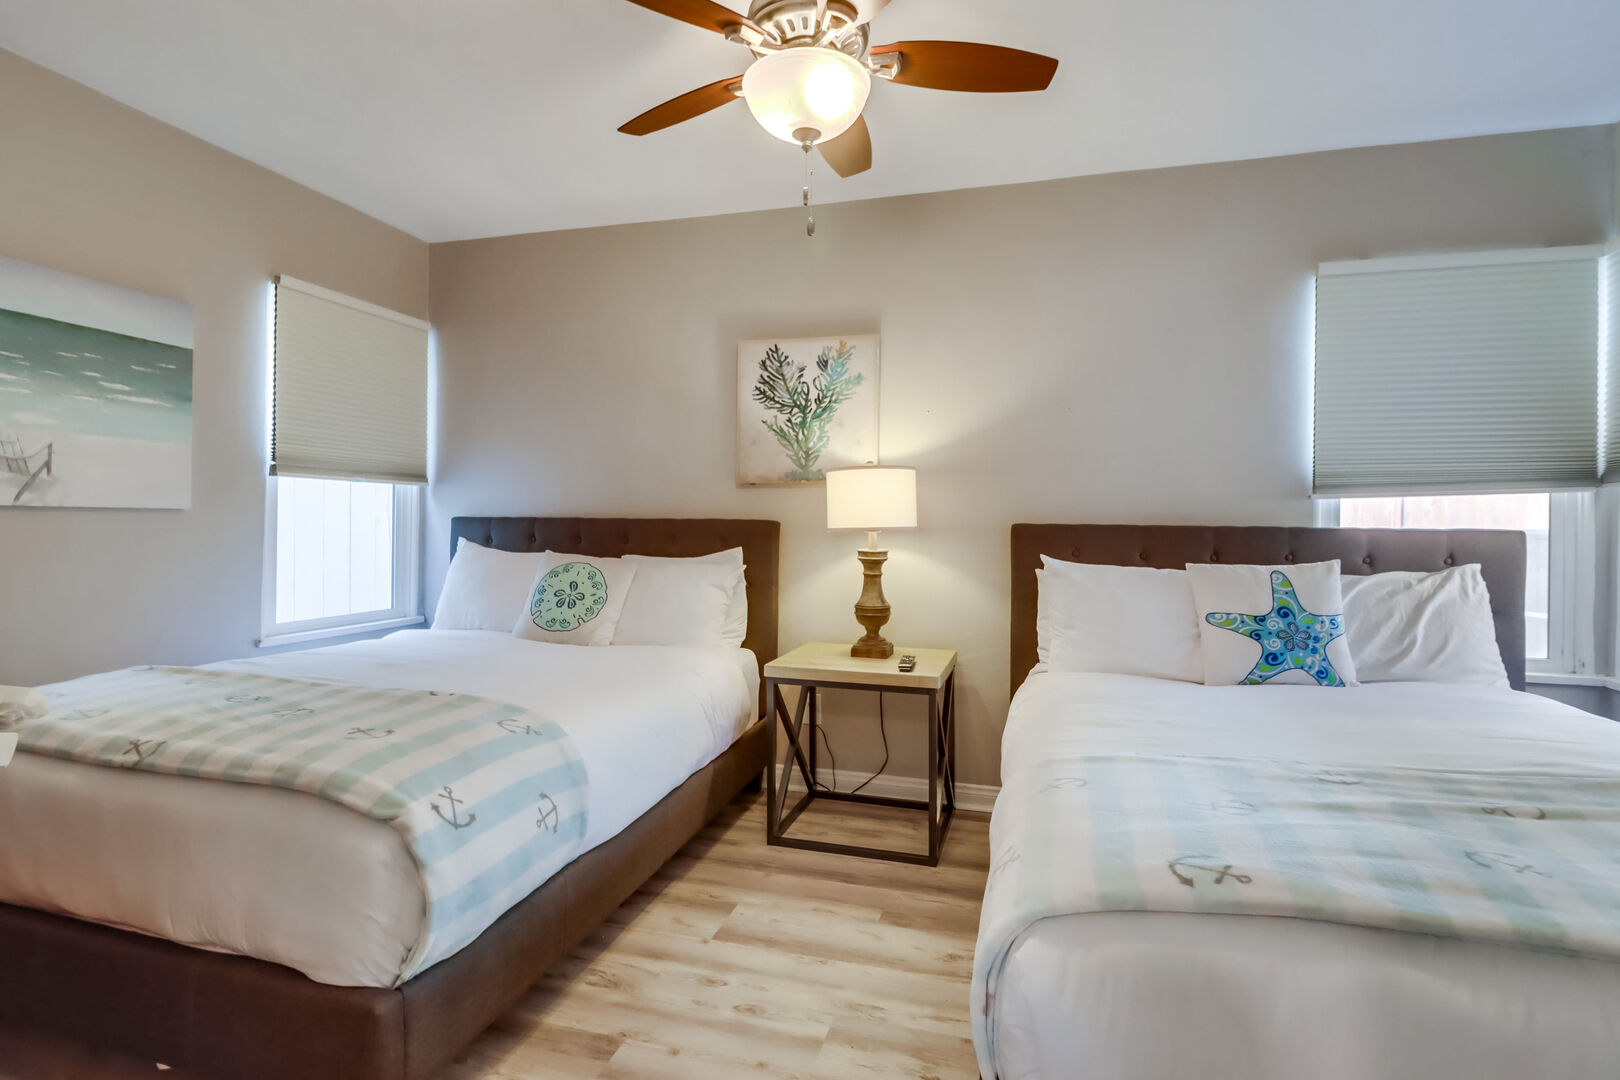 Lower level guest bedroom with 2 queen beds, ceiling fan, closet and dresser storage, and smart TV